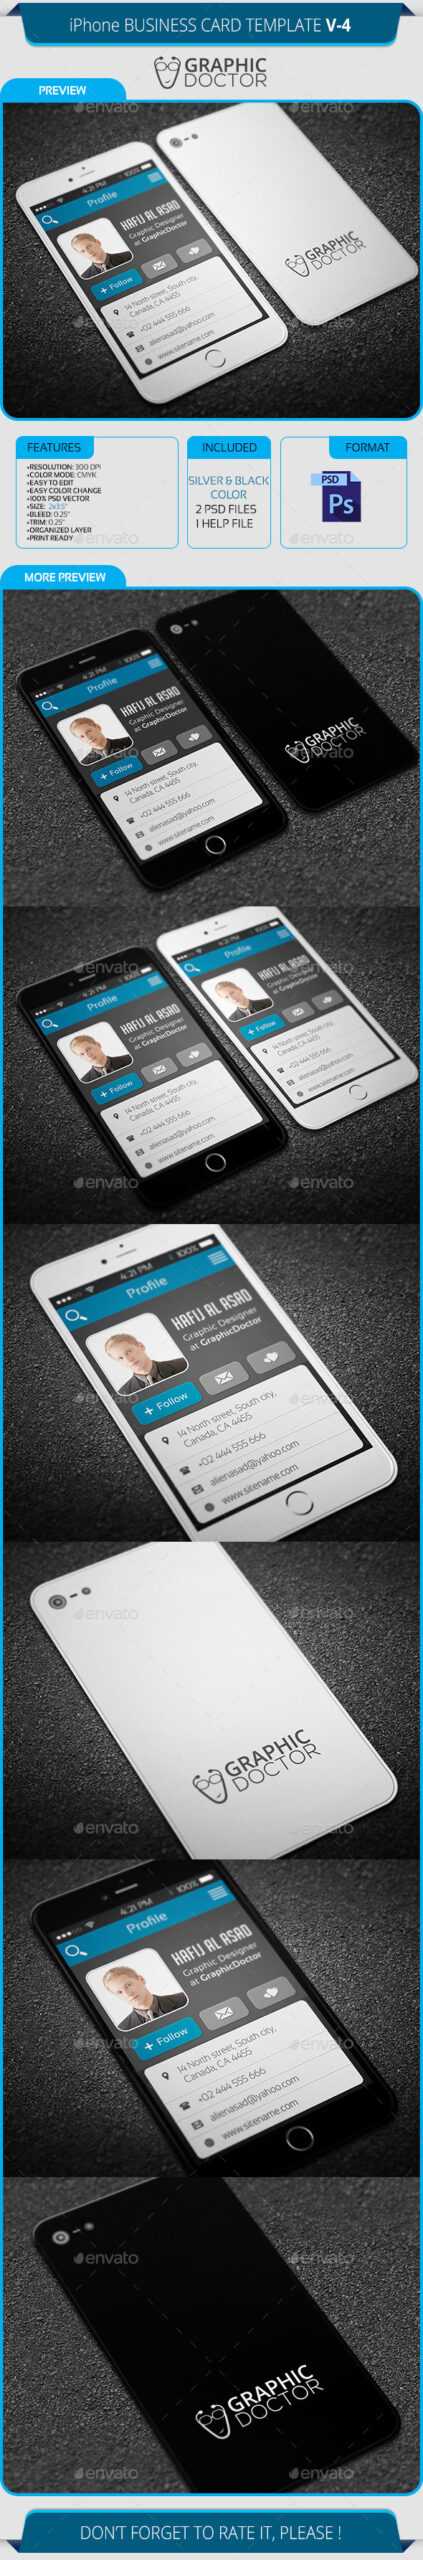 Real Object Business Card Templates From Graphicriver Regarding Iphone Business Card Template